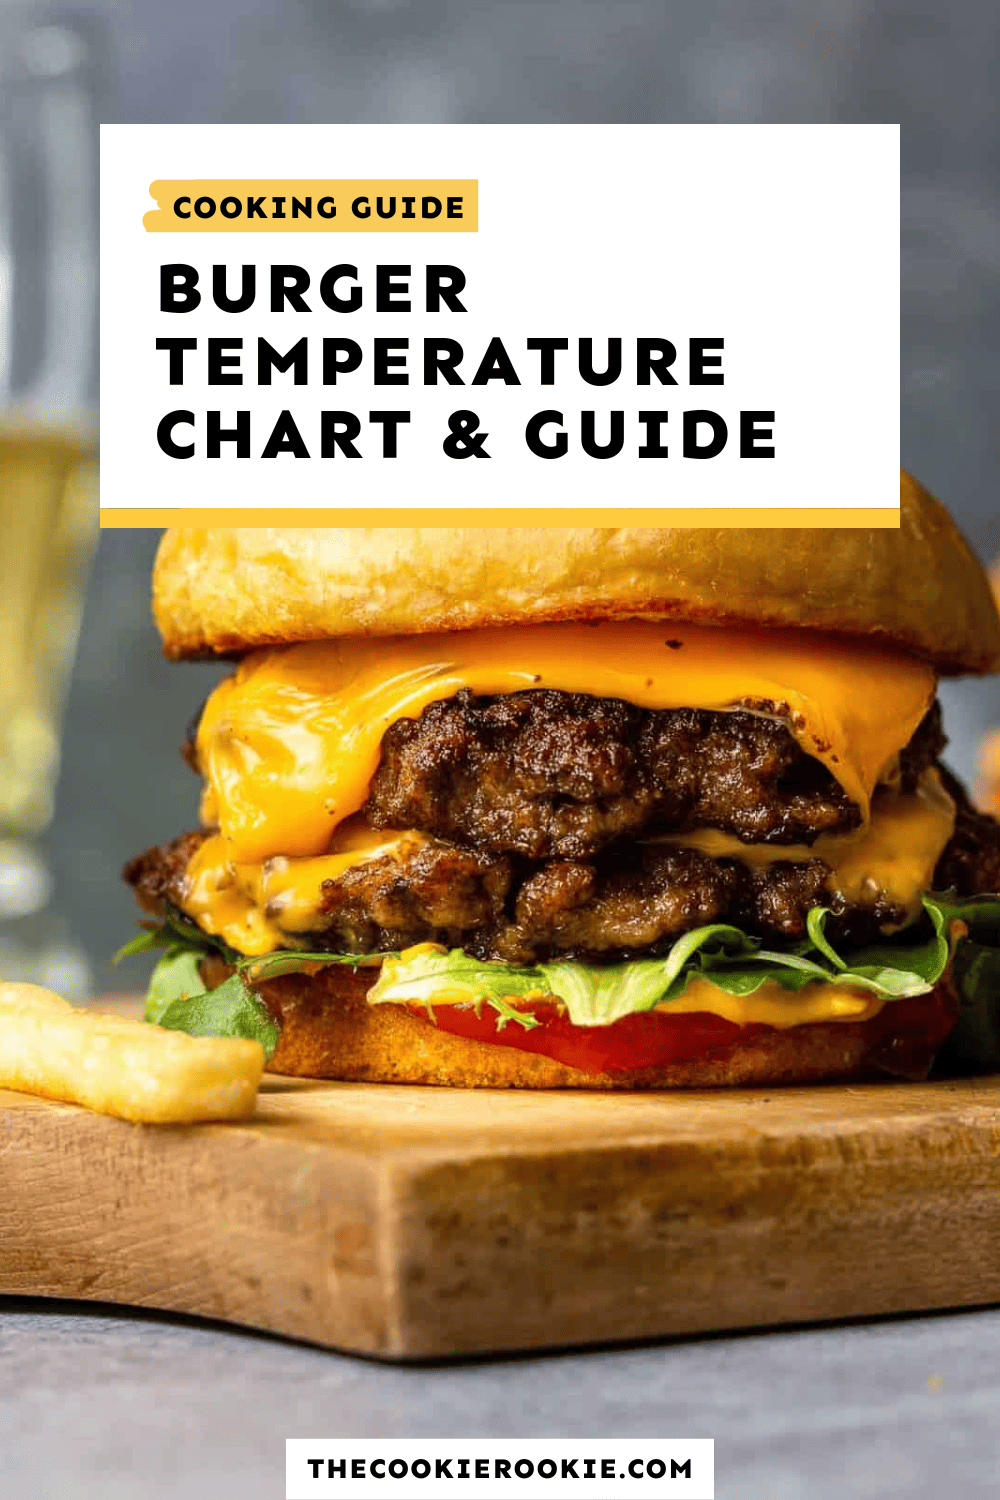 A burger cooking guide with temperature recommendations displayed on a cutting board.